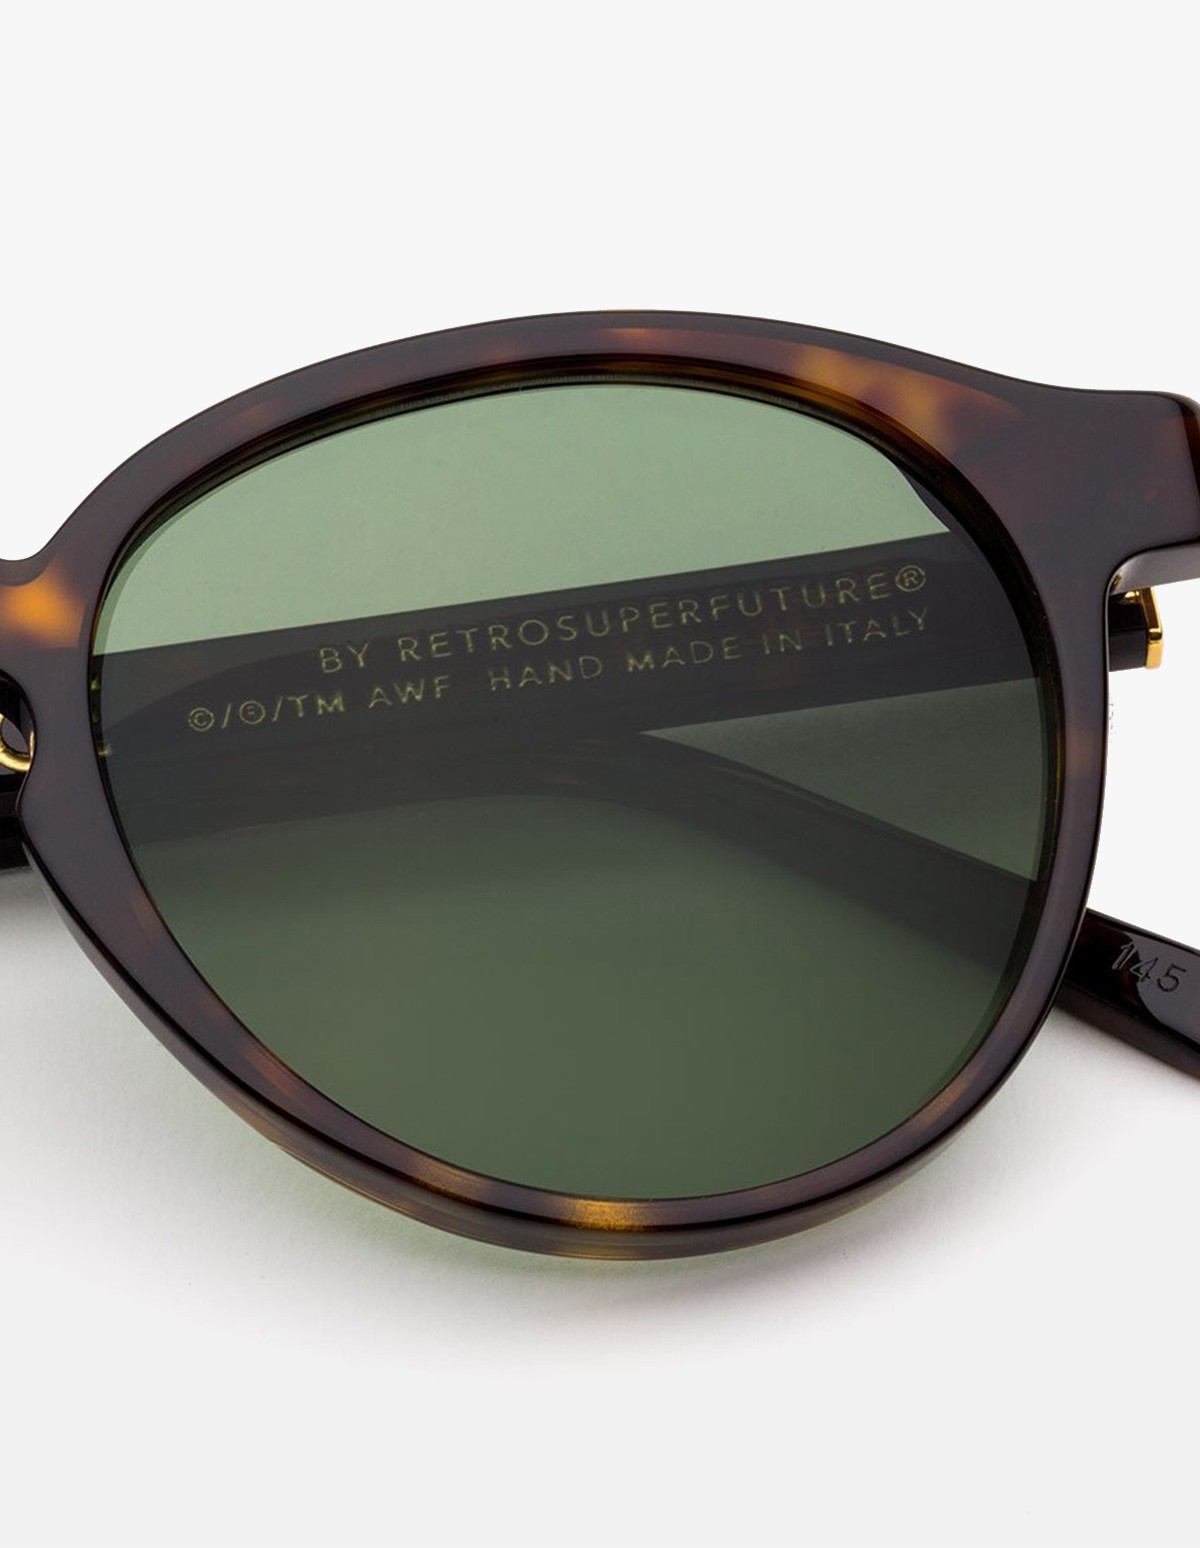 Retrosuperfuture Andy Warhol The Iconic Series Sunglasses in 3627 Green 